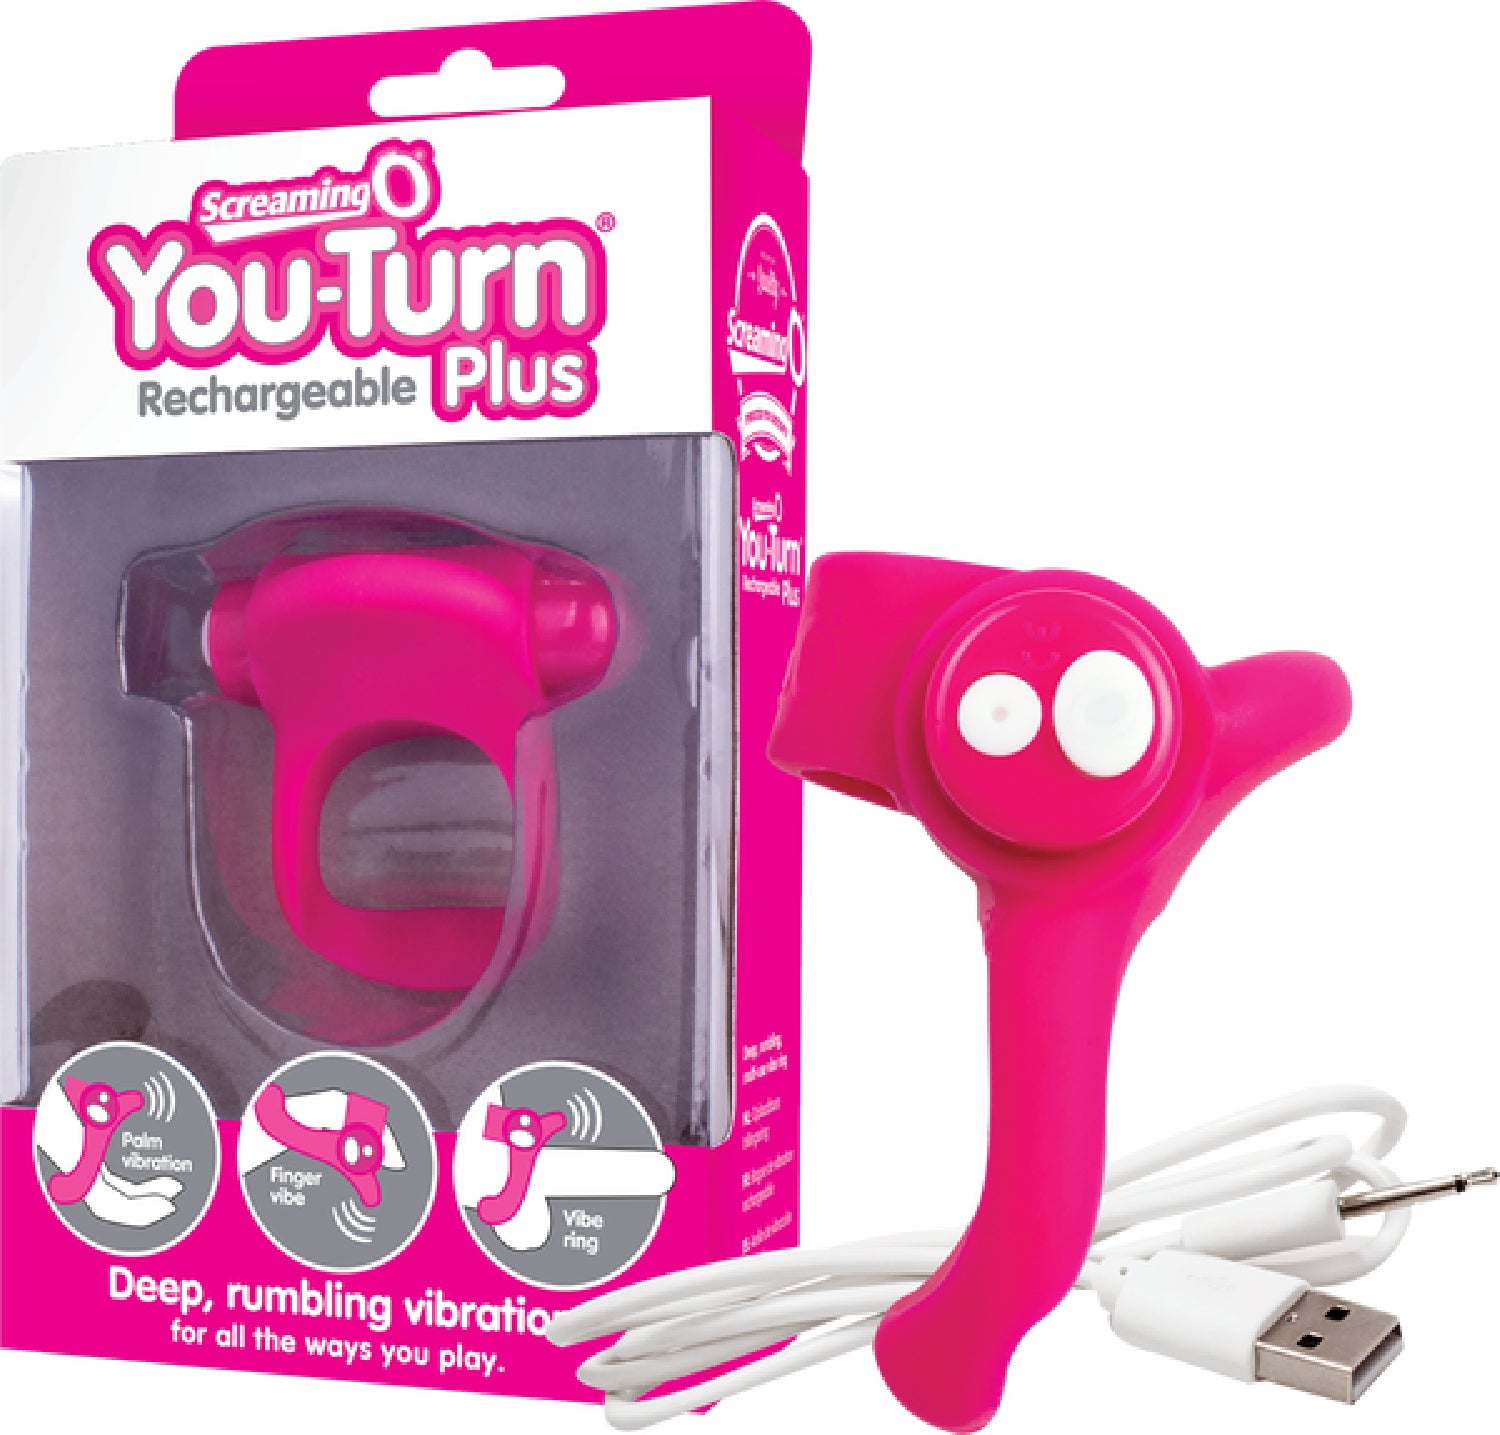 Screaming O You-Turn Rechargeable Plus Finger Vibe And Cock Ring Strawberry - Club X